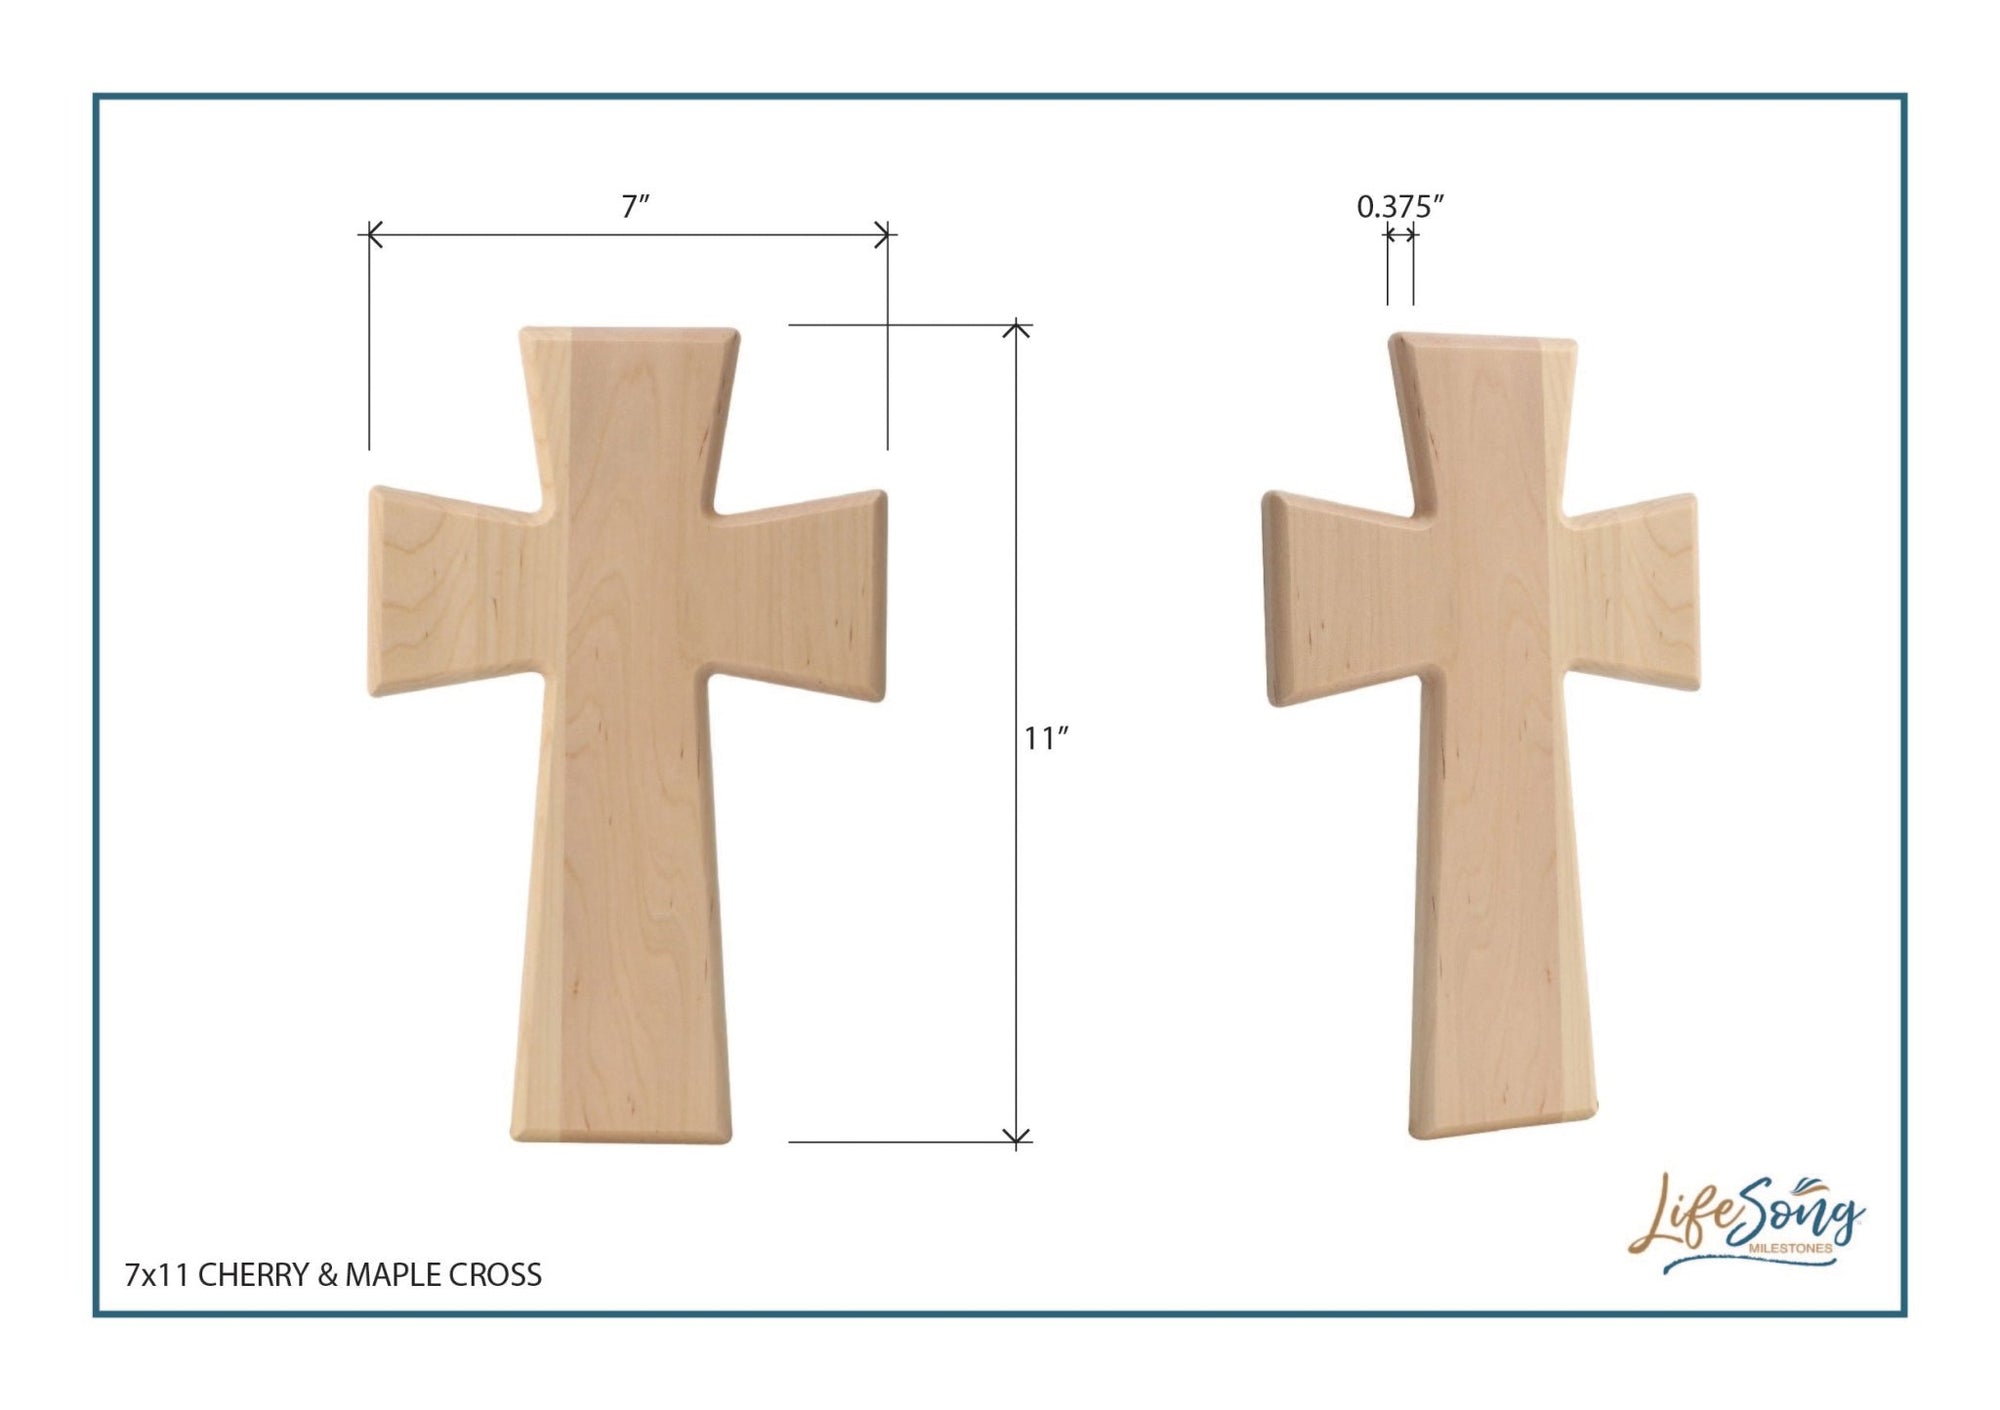 Custom Baby Dedication Wooden Wall Cross – For I know the plans - Jeremiah 29:11 - LifeSong Milestones